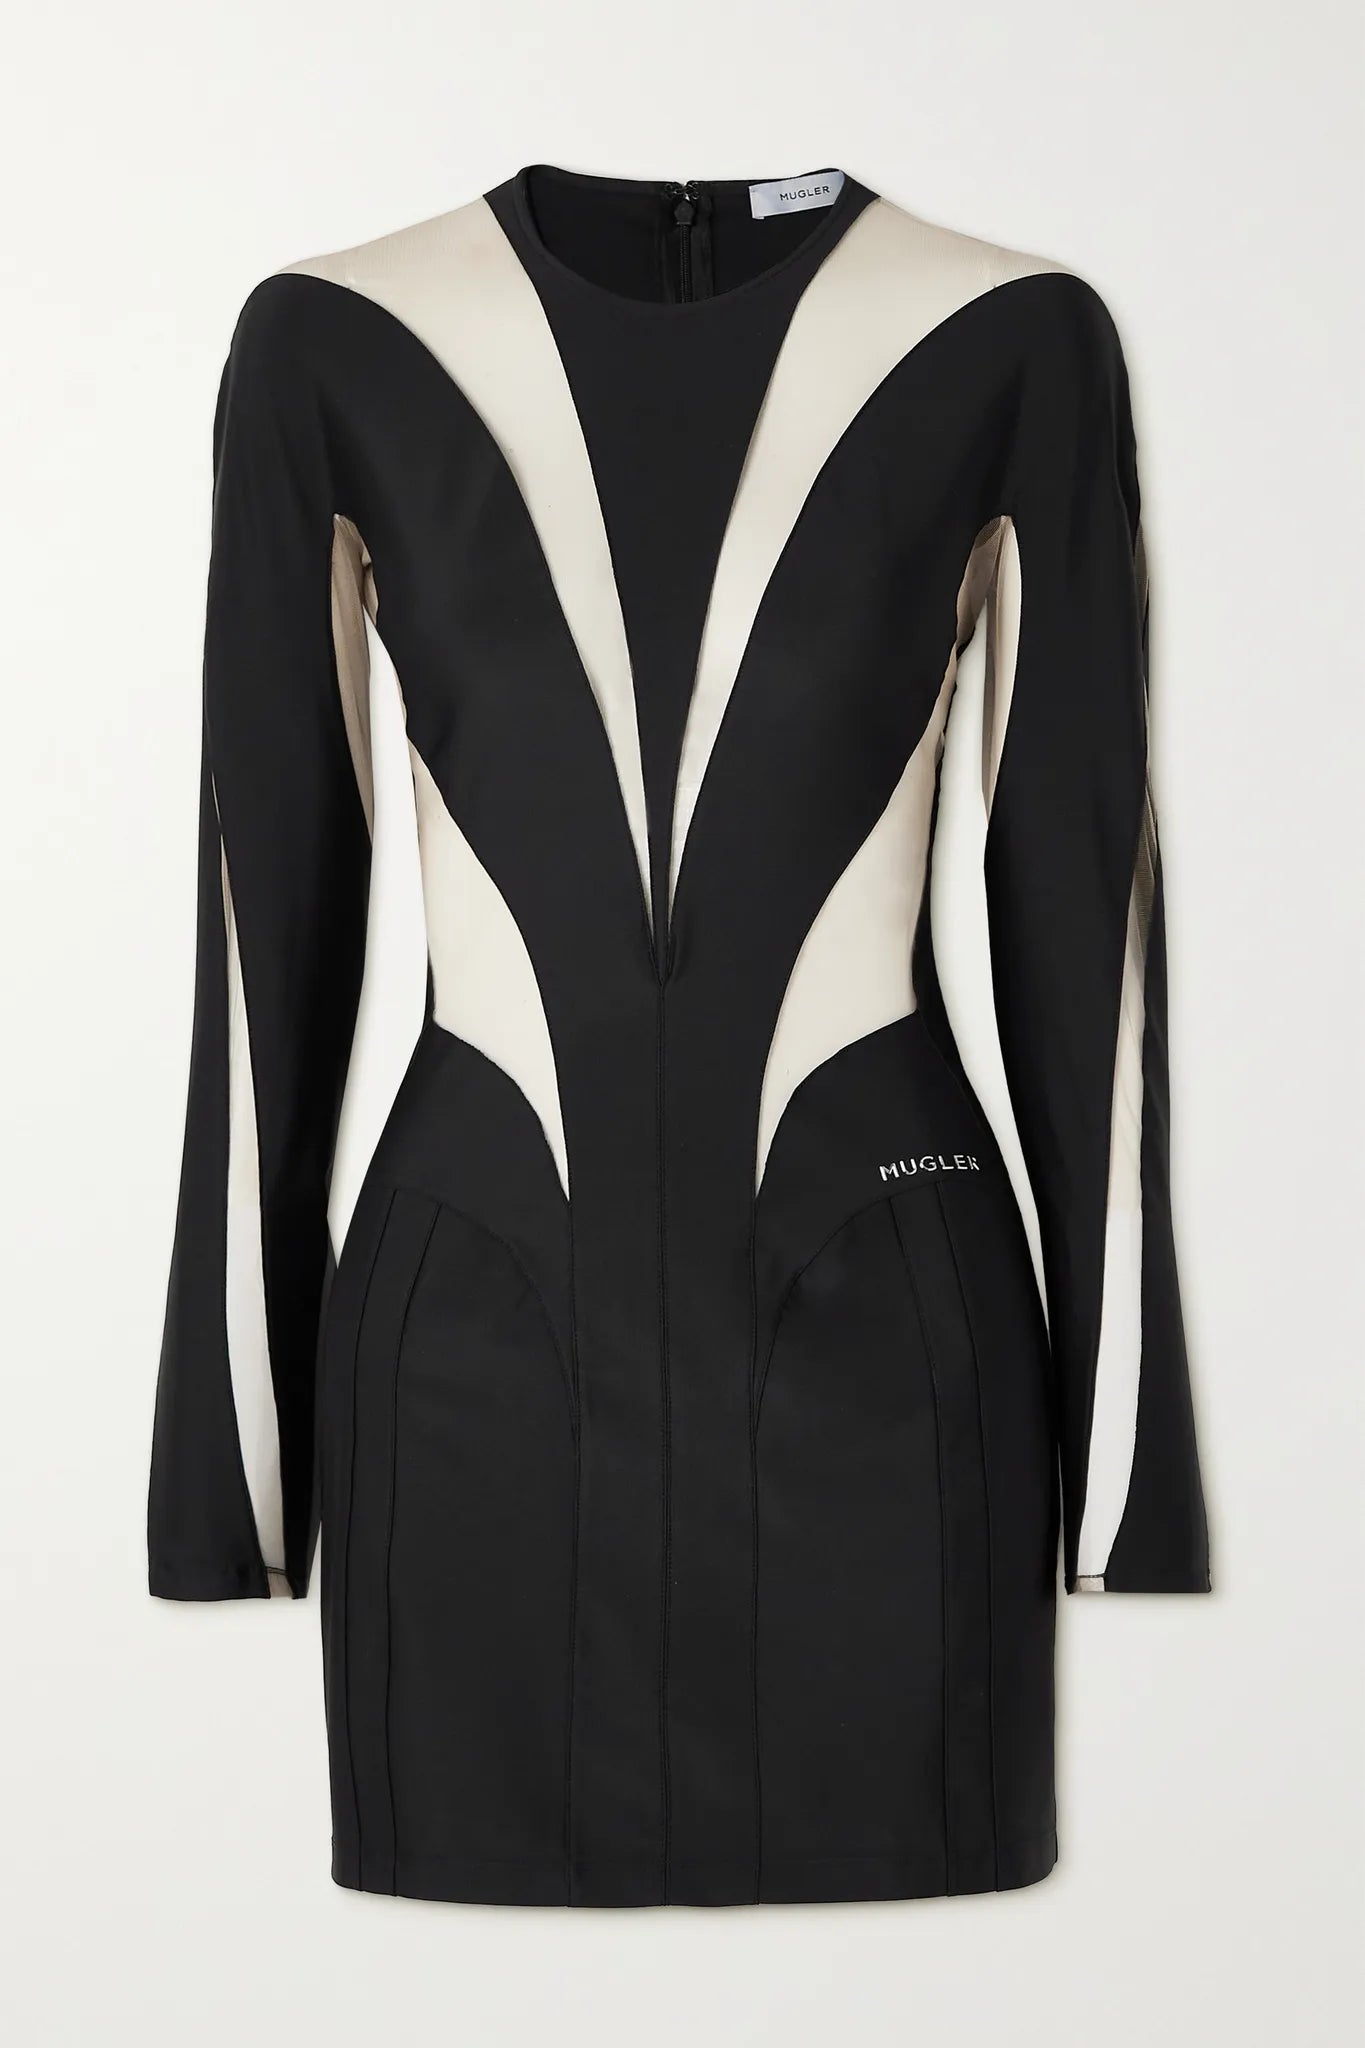 Thierry Mugler Black Spiral Panelled Dress - V & G Luxe Boutique